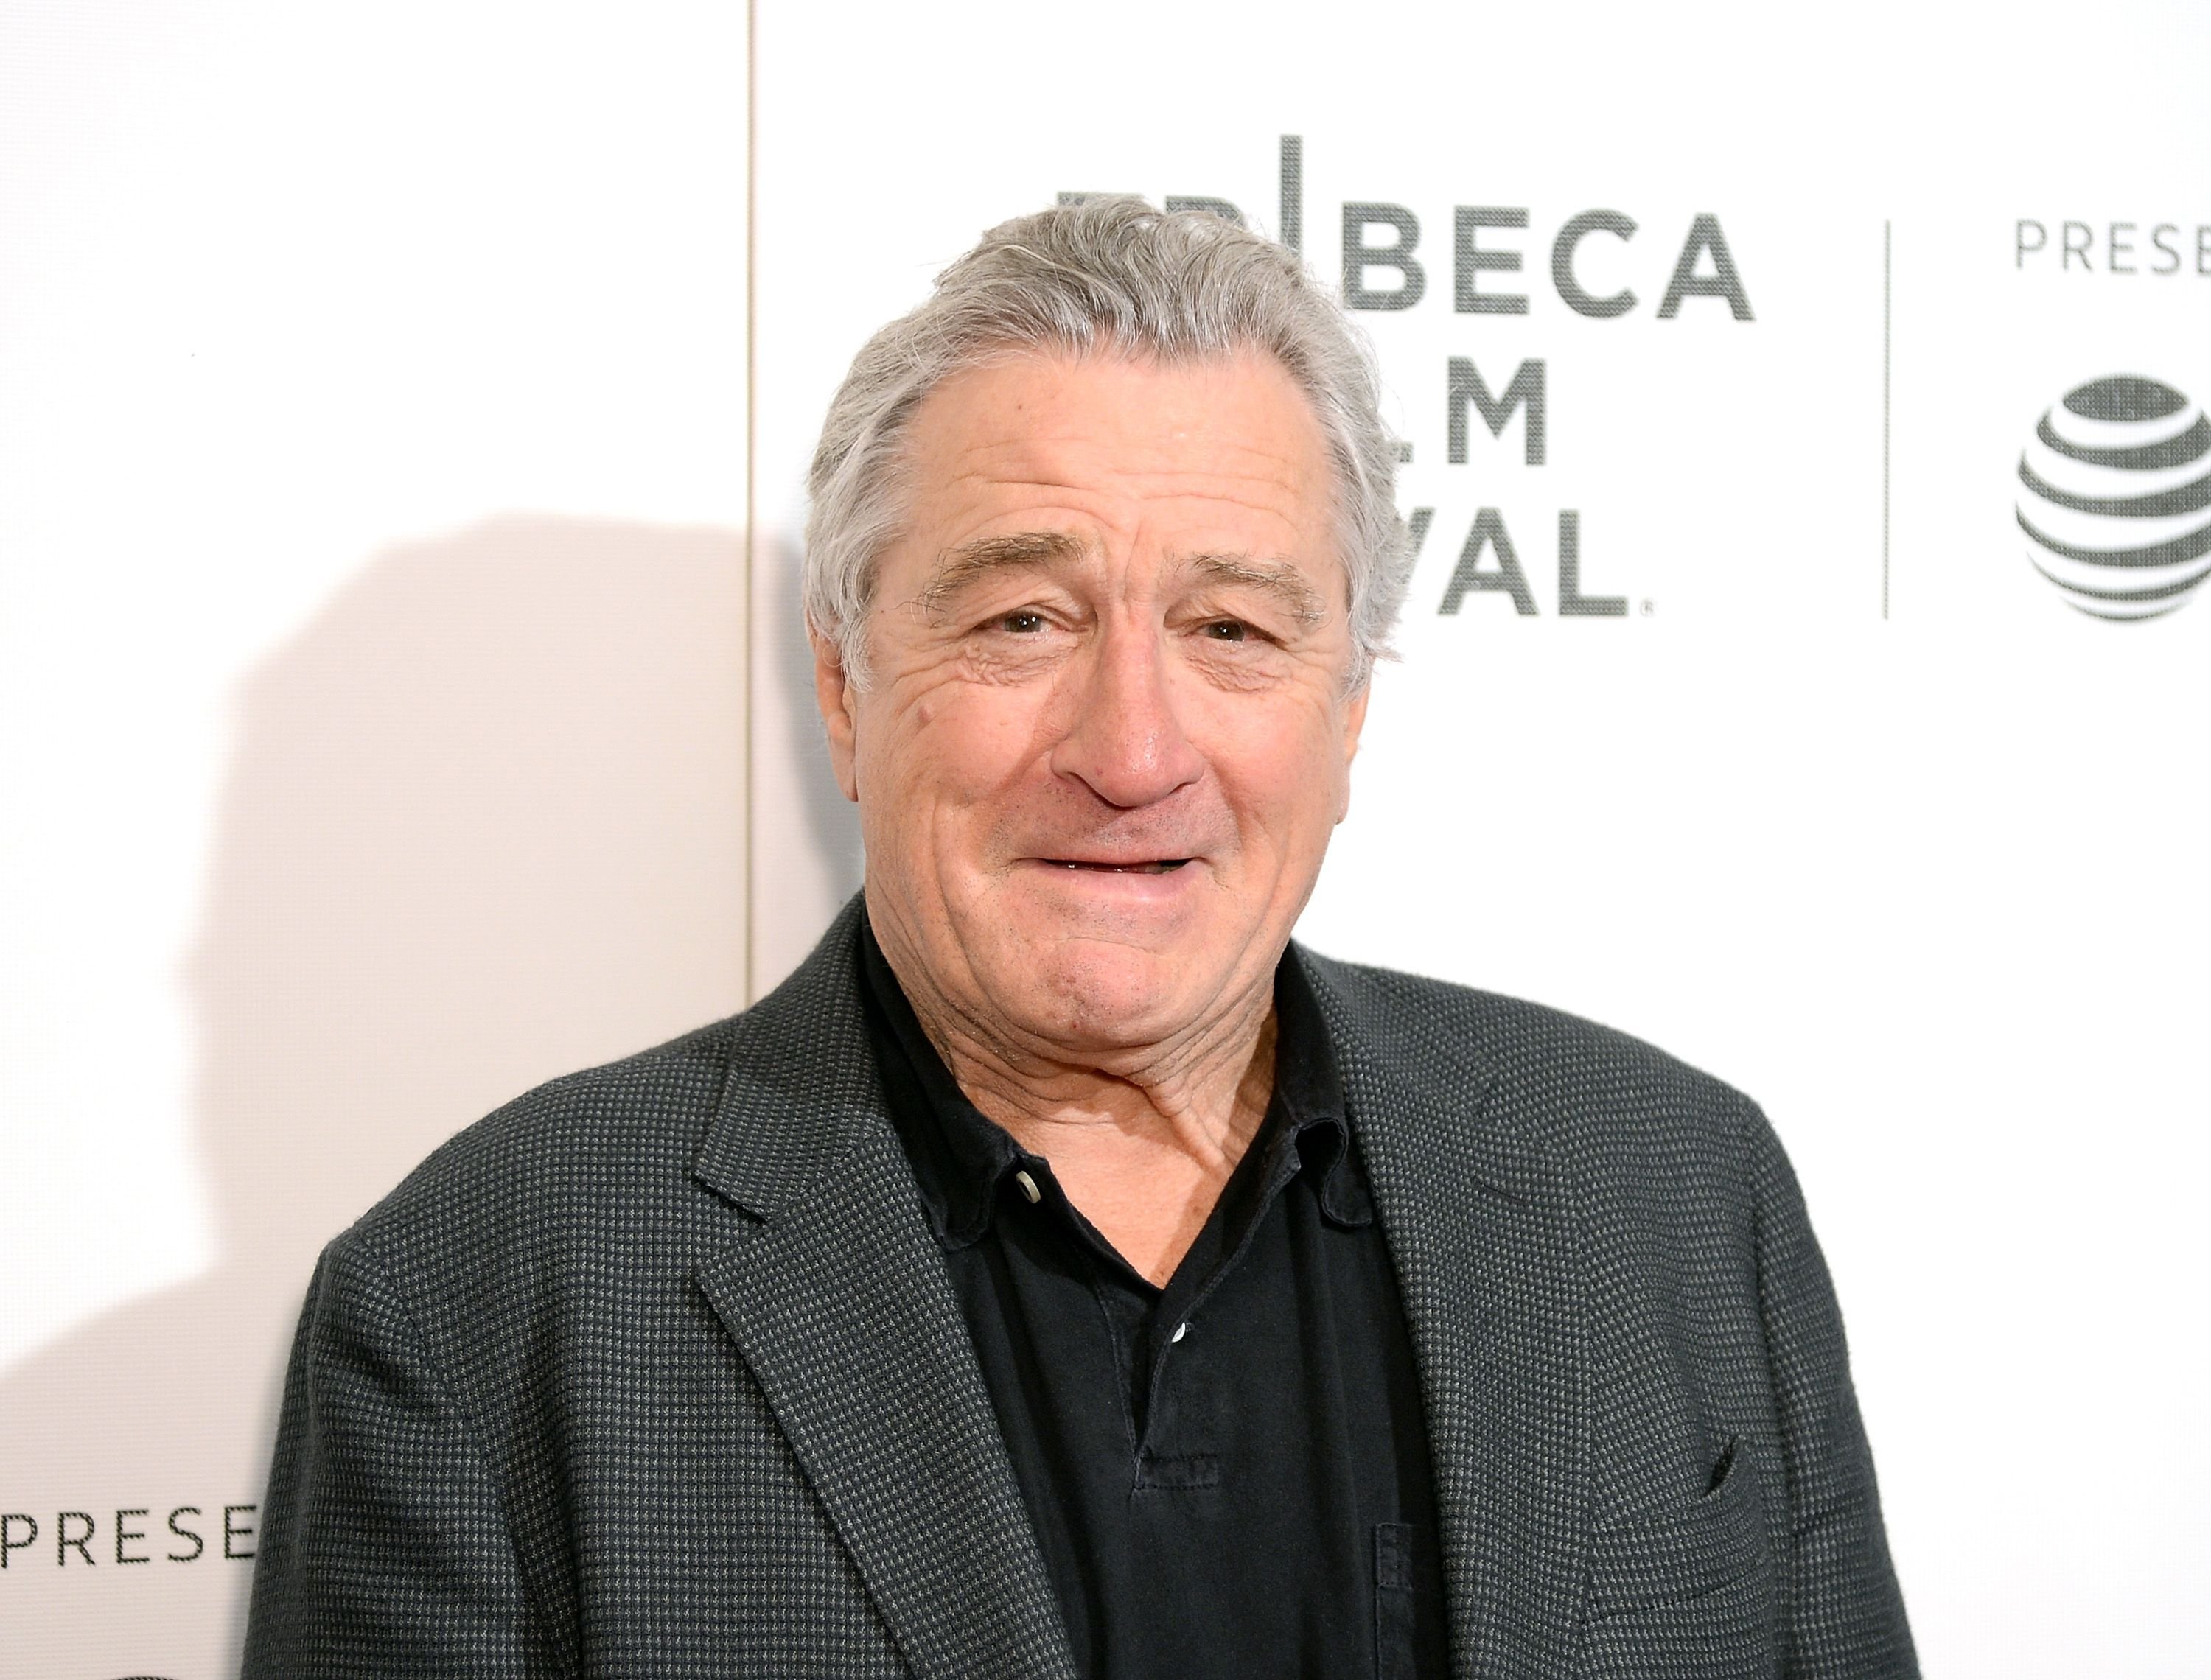 Robert De Niro at the premiere of "Women Walks Ahead" at the Tribeca Film Festival on April 25, 2018, in New York City | Photo: Andrew Toth/Getty Images